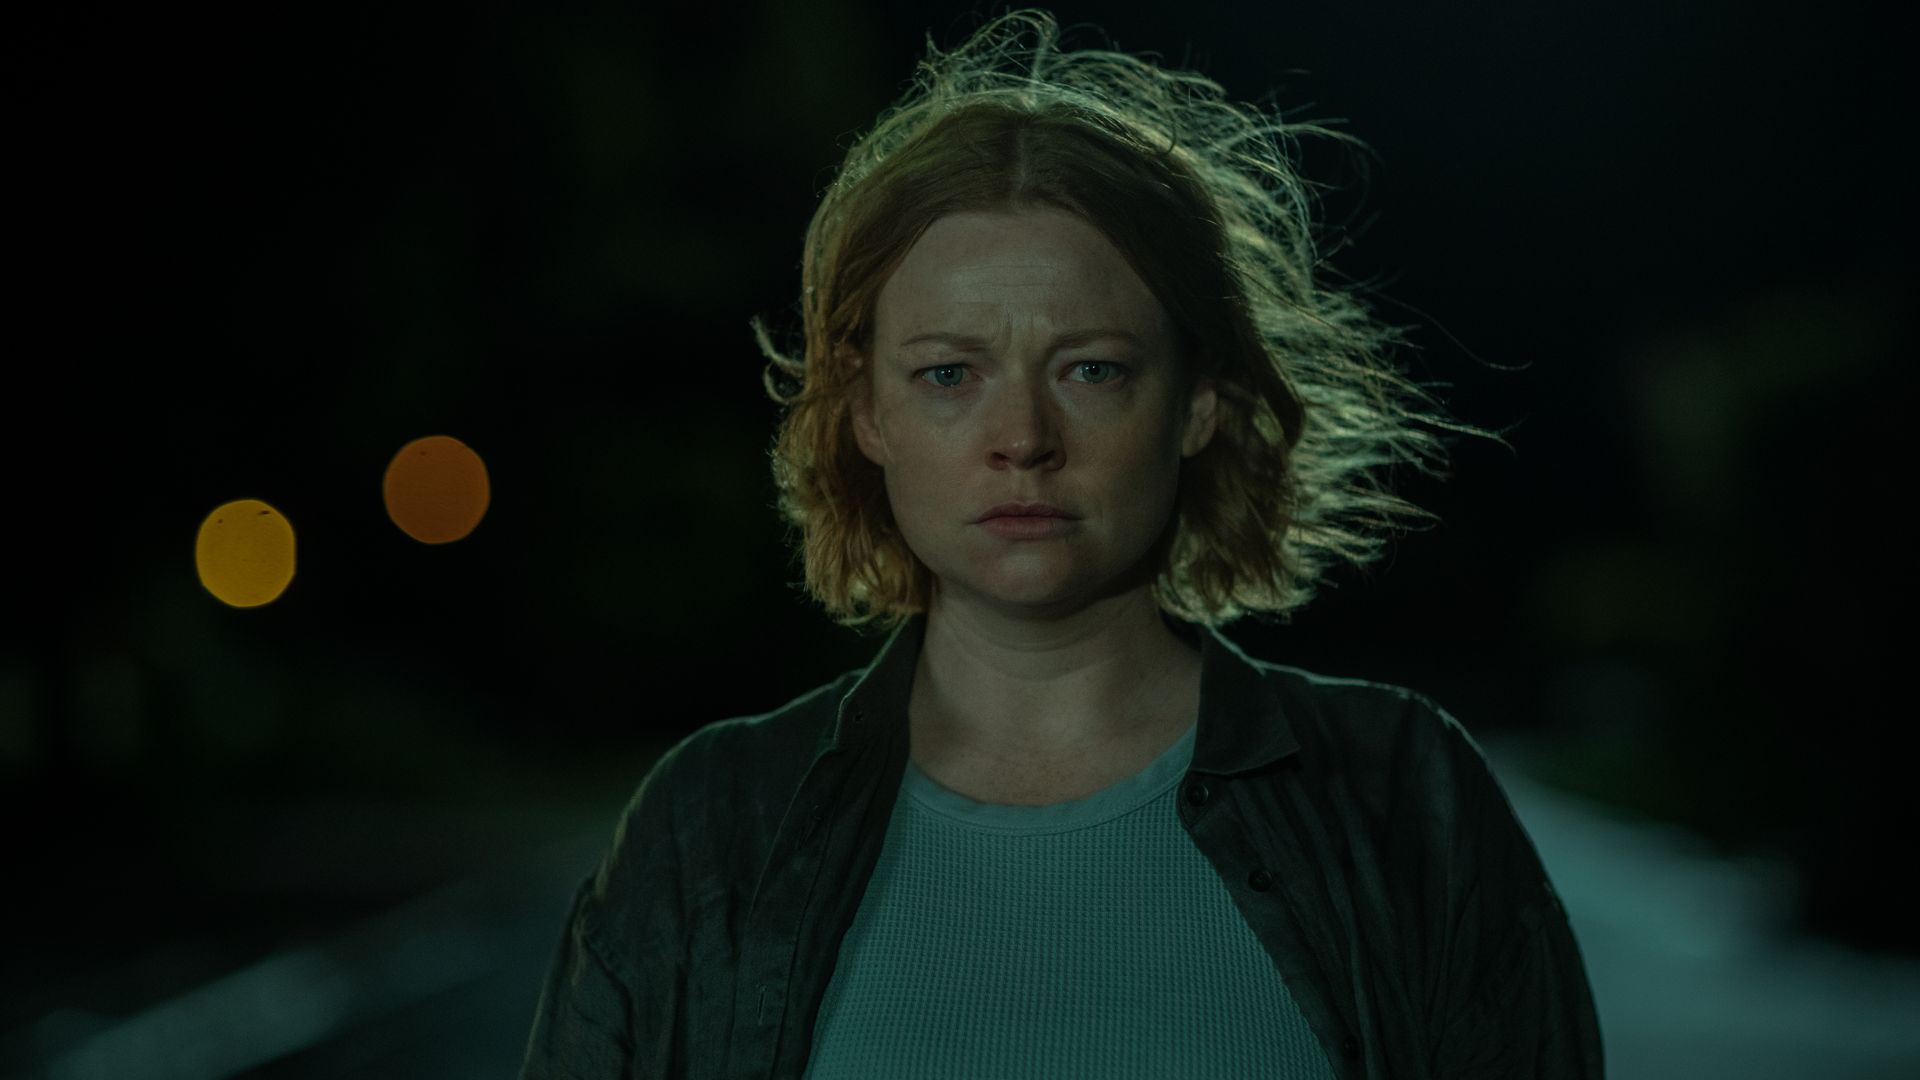 Sarah Snook in her first role after Succession